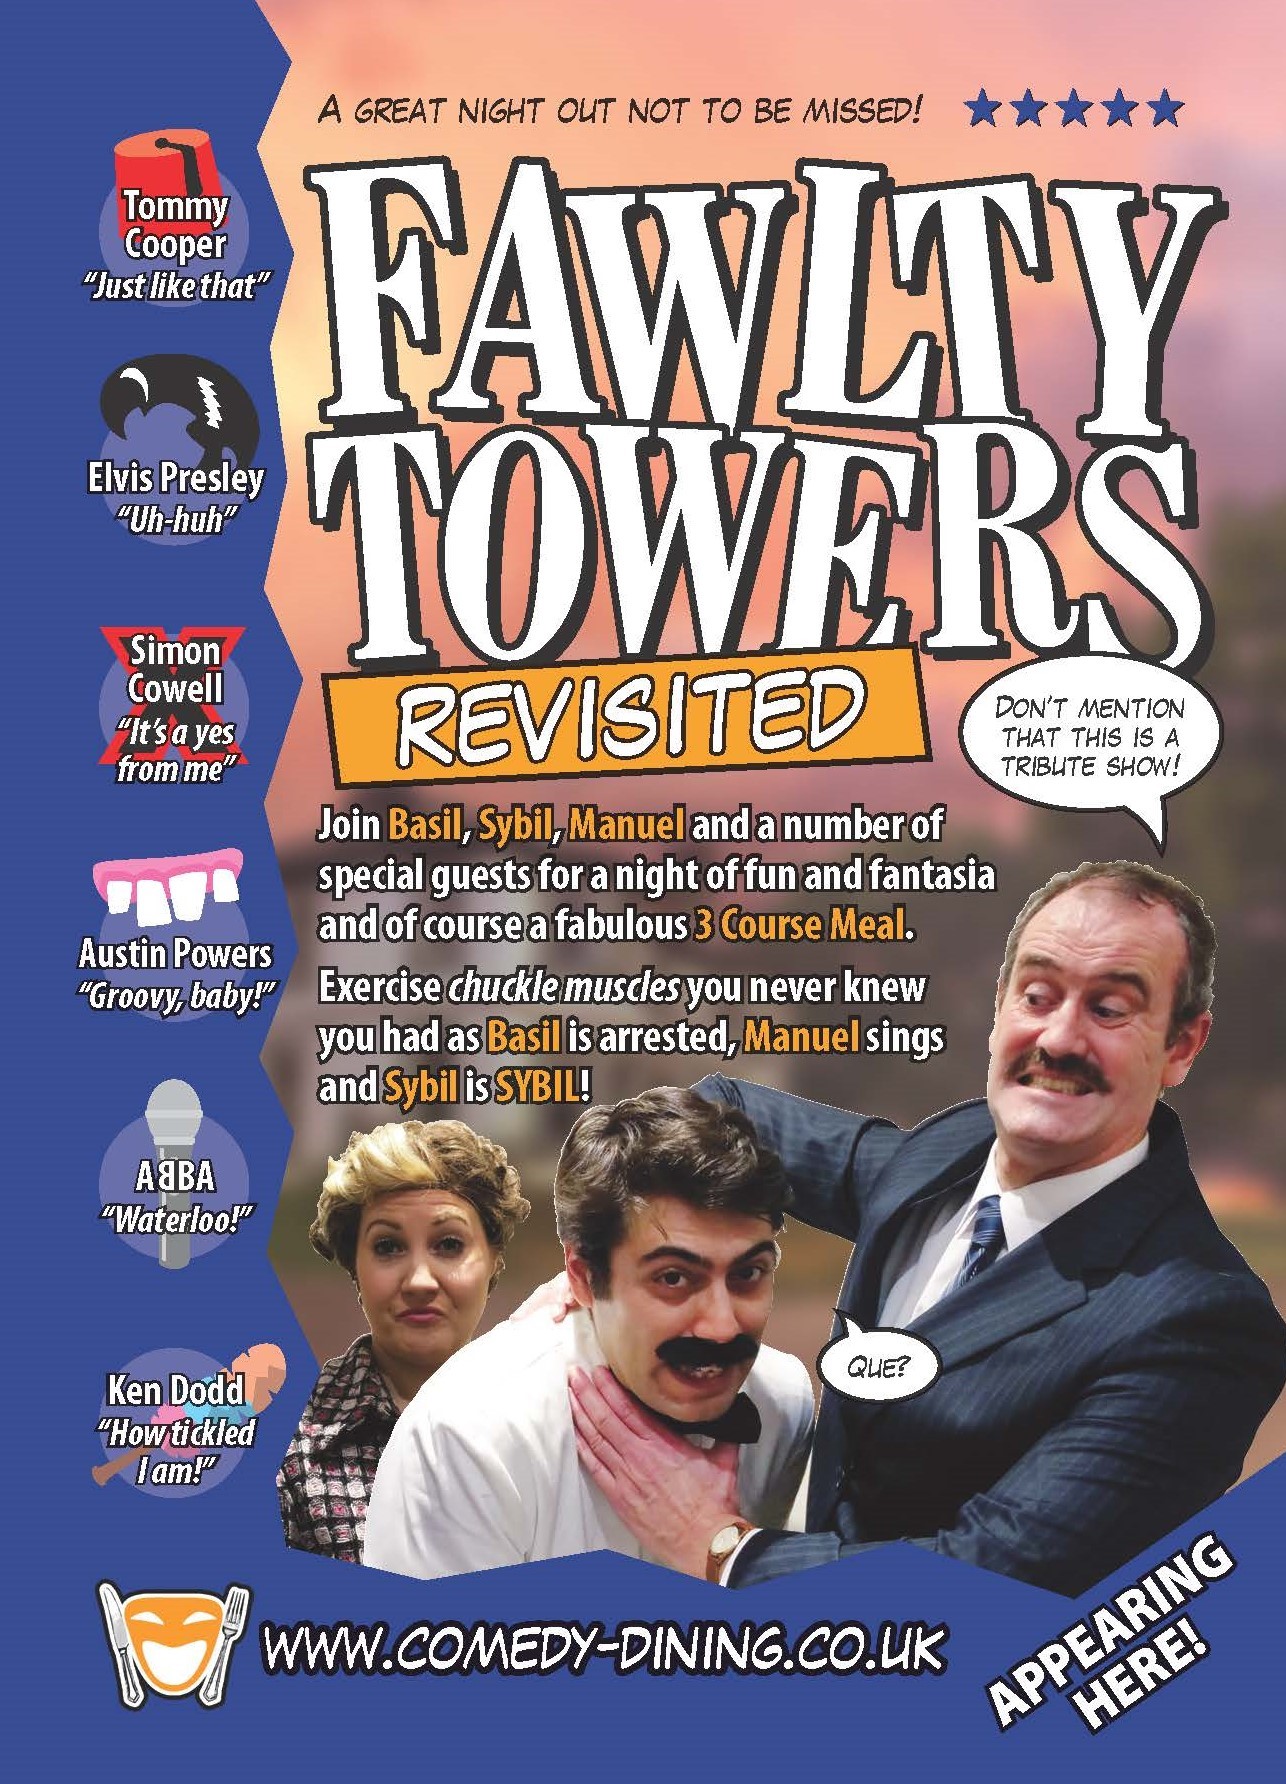 Fawlty Towers Revisited Comedy Dining Event Greyhound Hotel Lutterworth